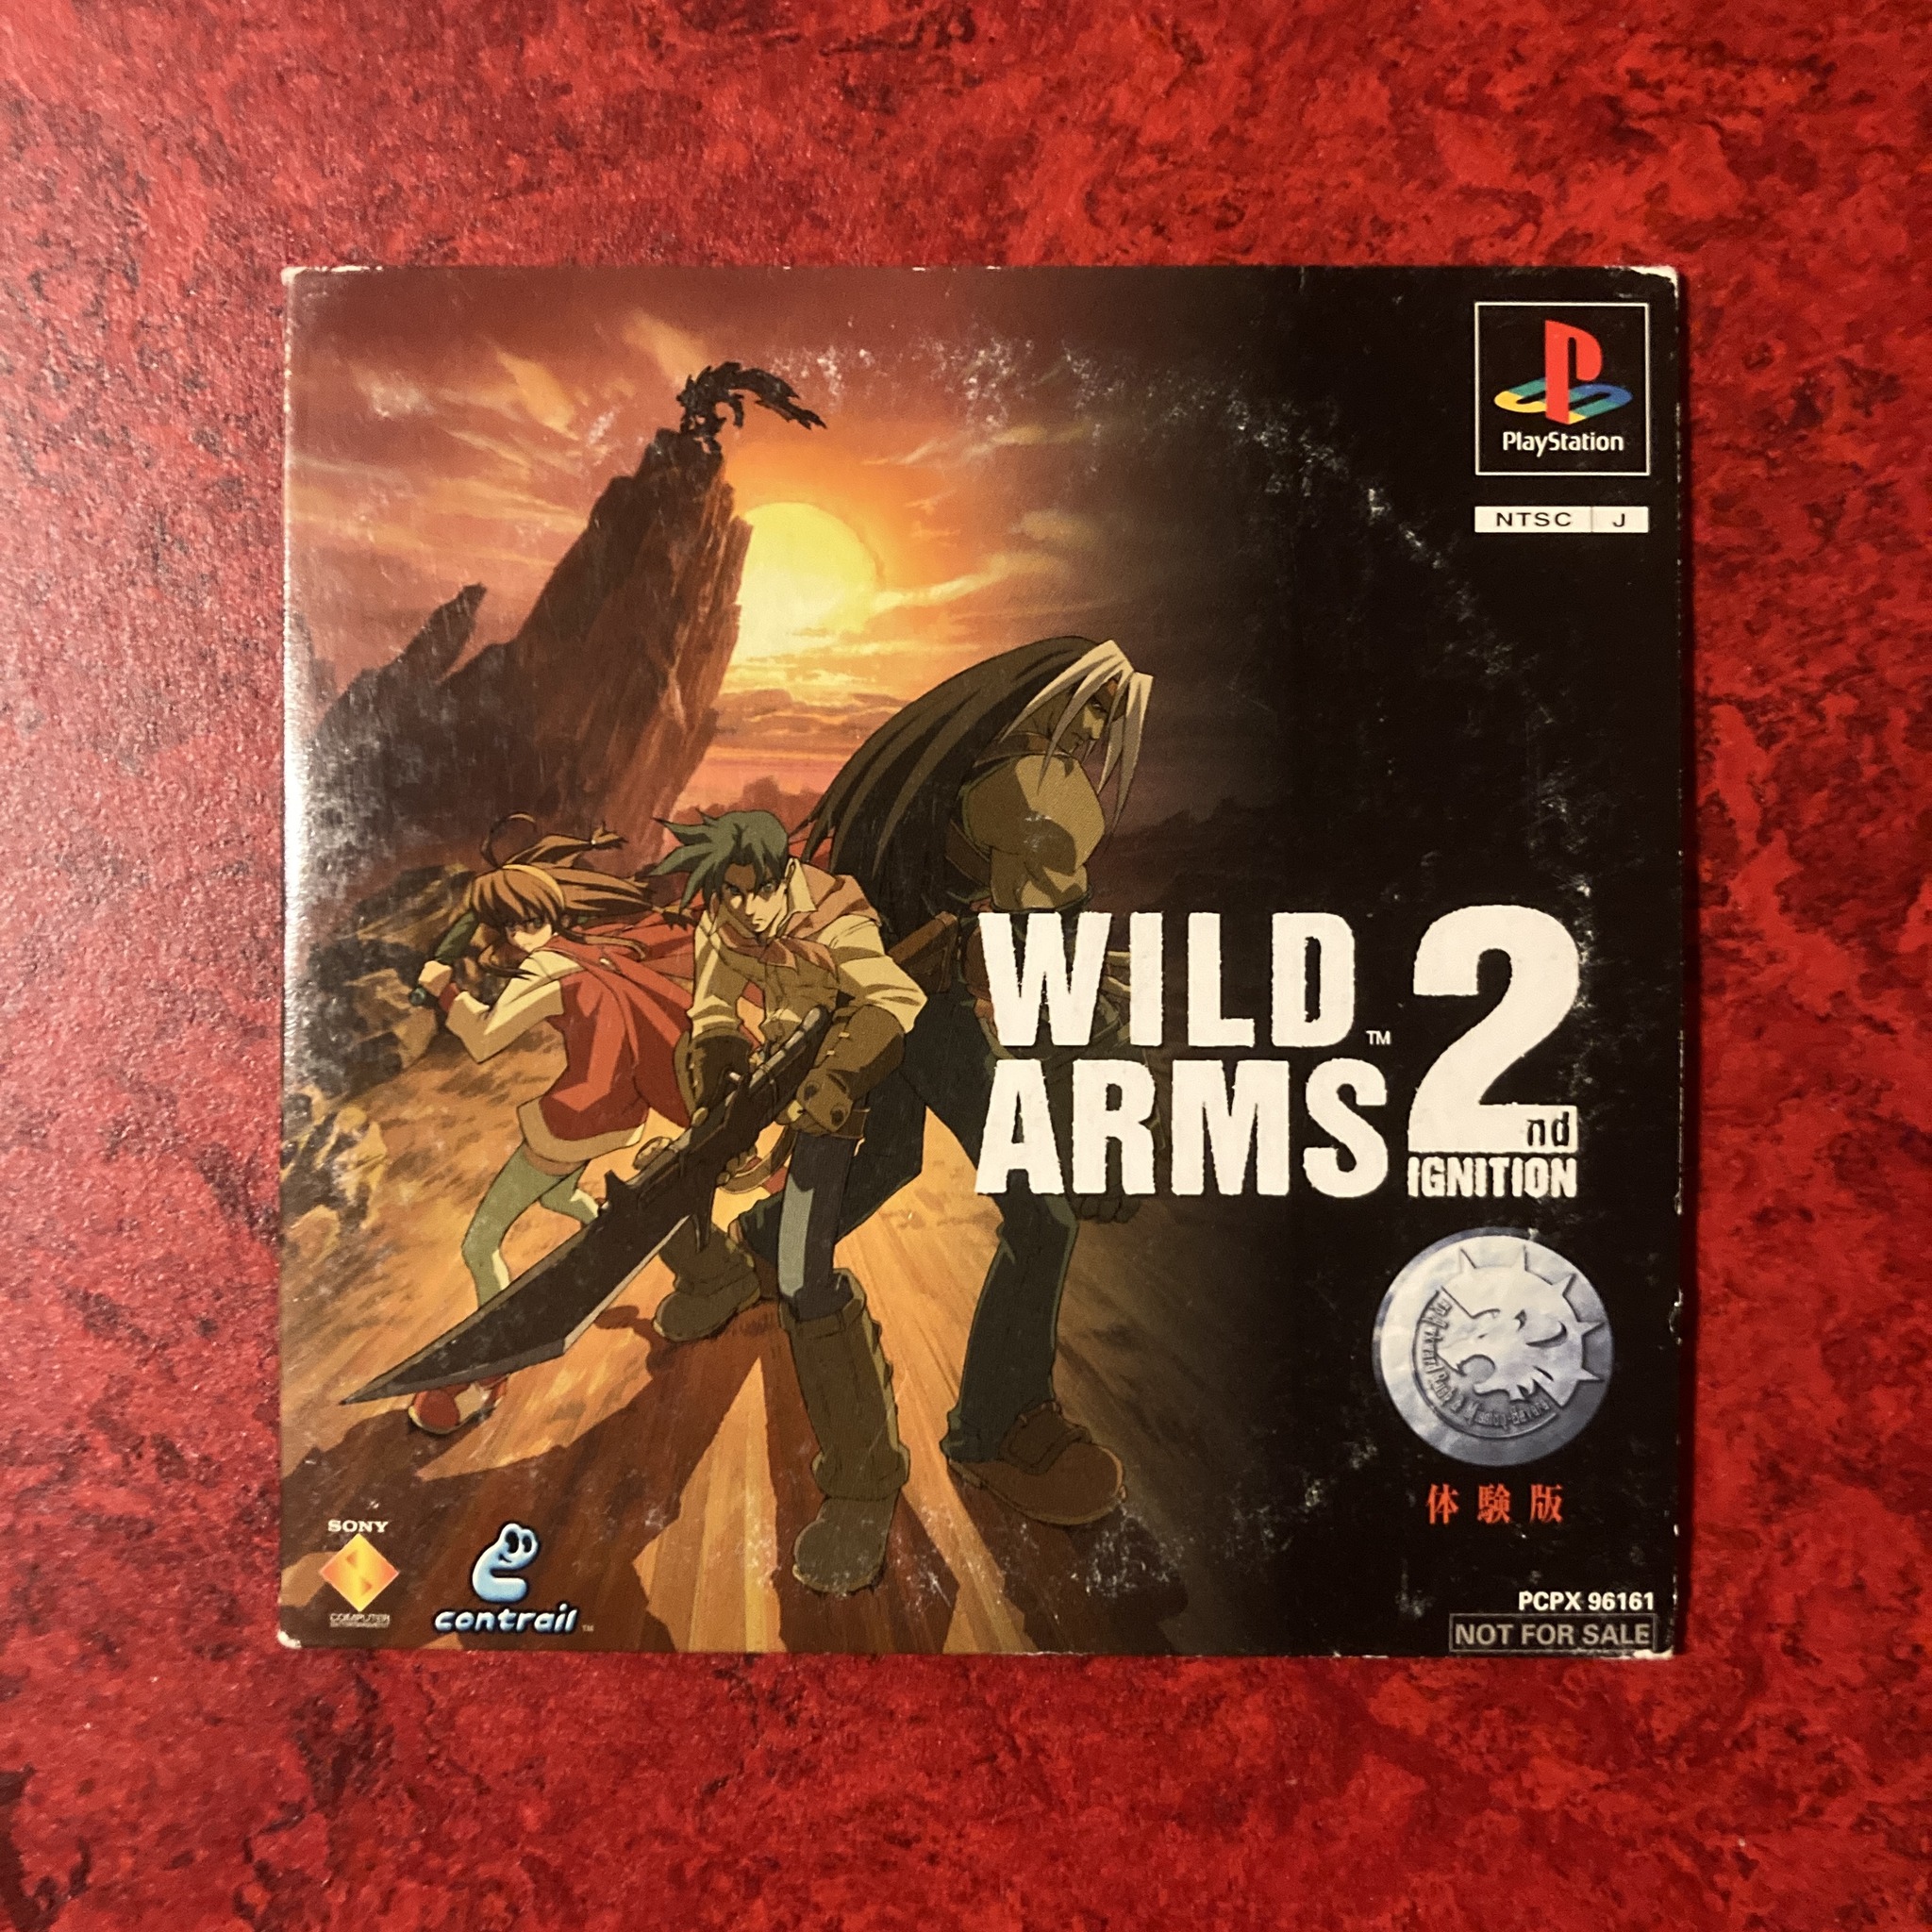 Wild Arms 2 / Wild Arms 2nd Ignition (PlayStation)